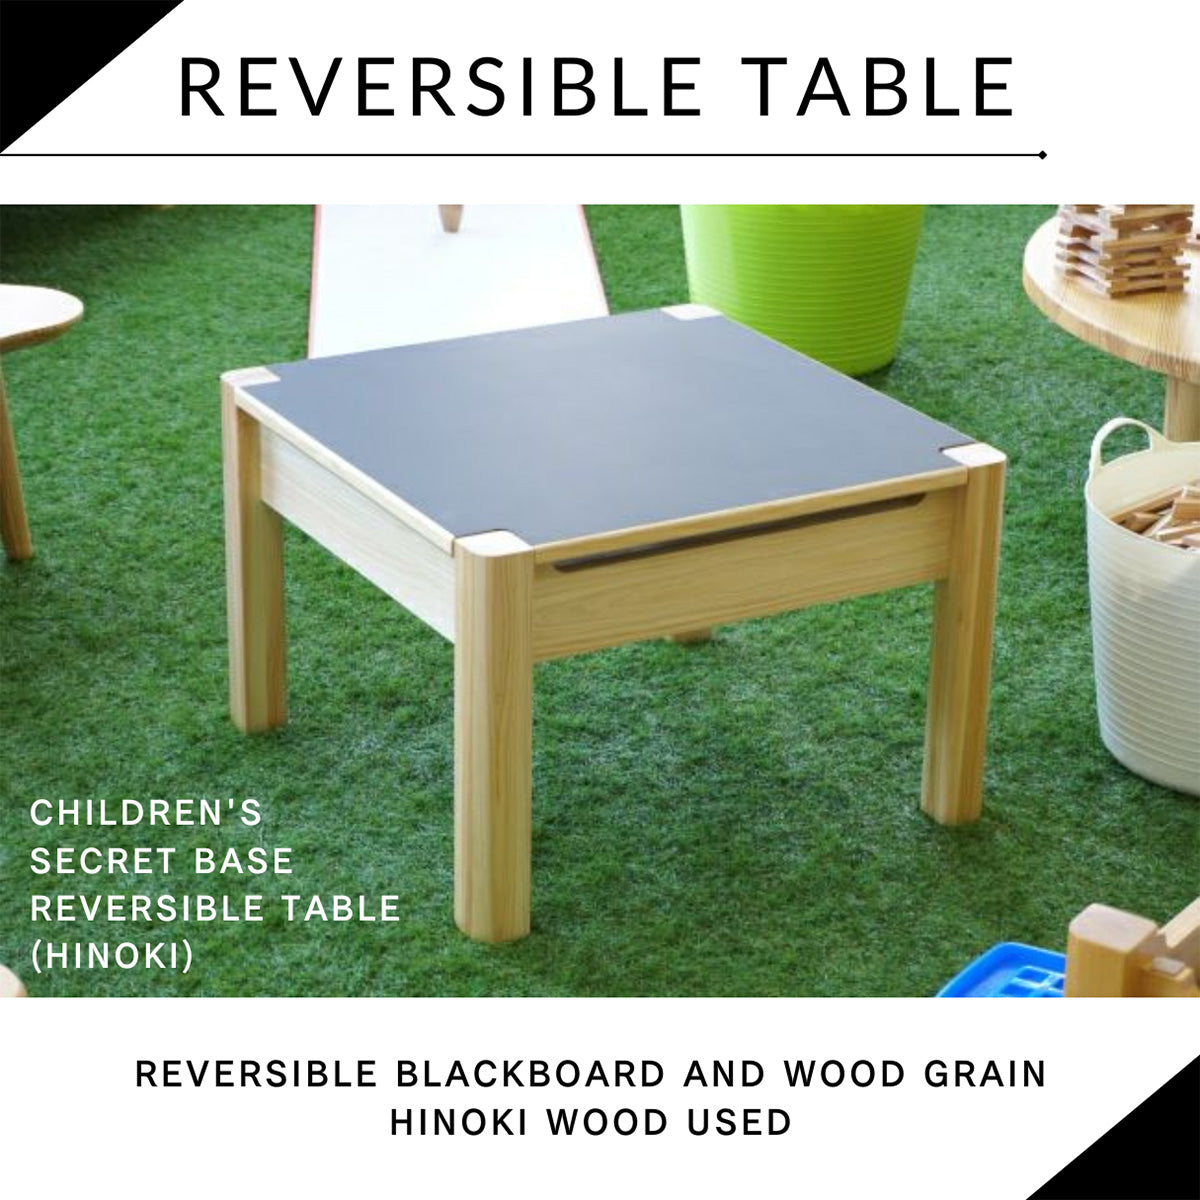 Top image of reversible cypress table with blackboard and woodgrain【Children's secret base】